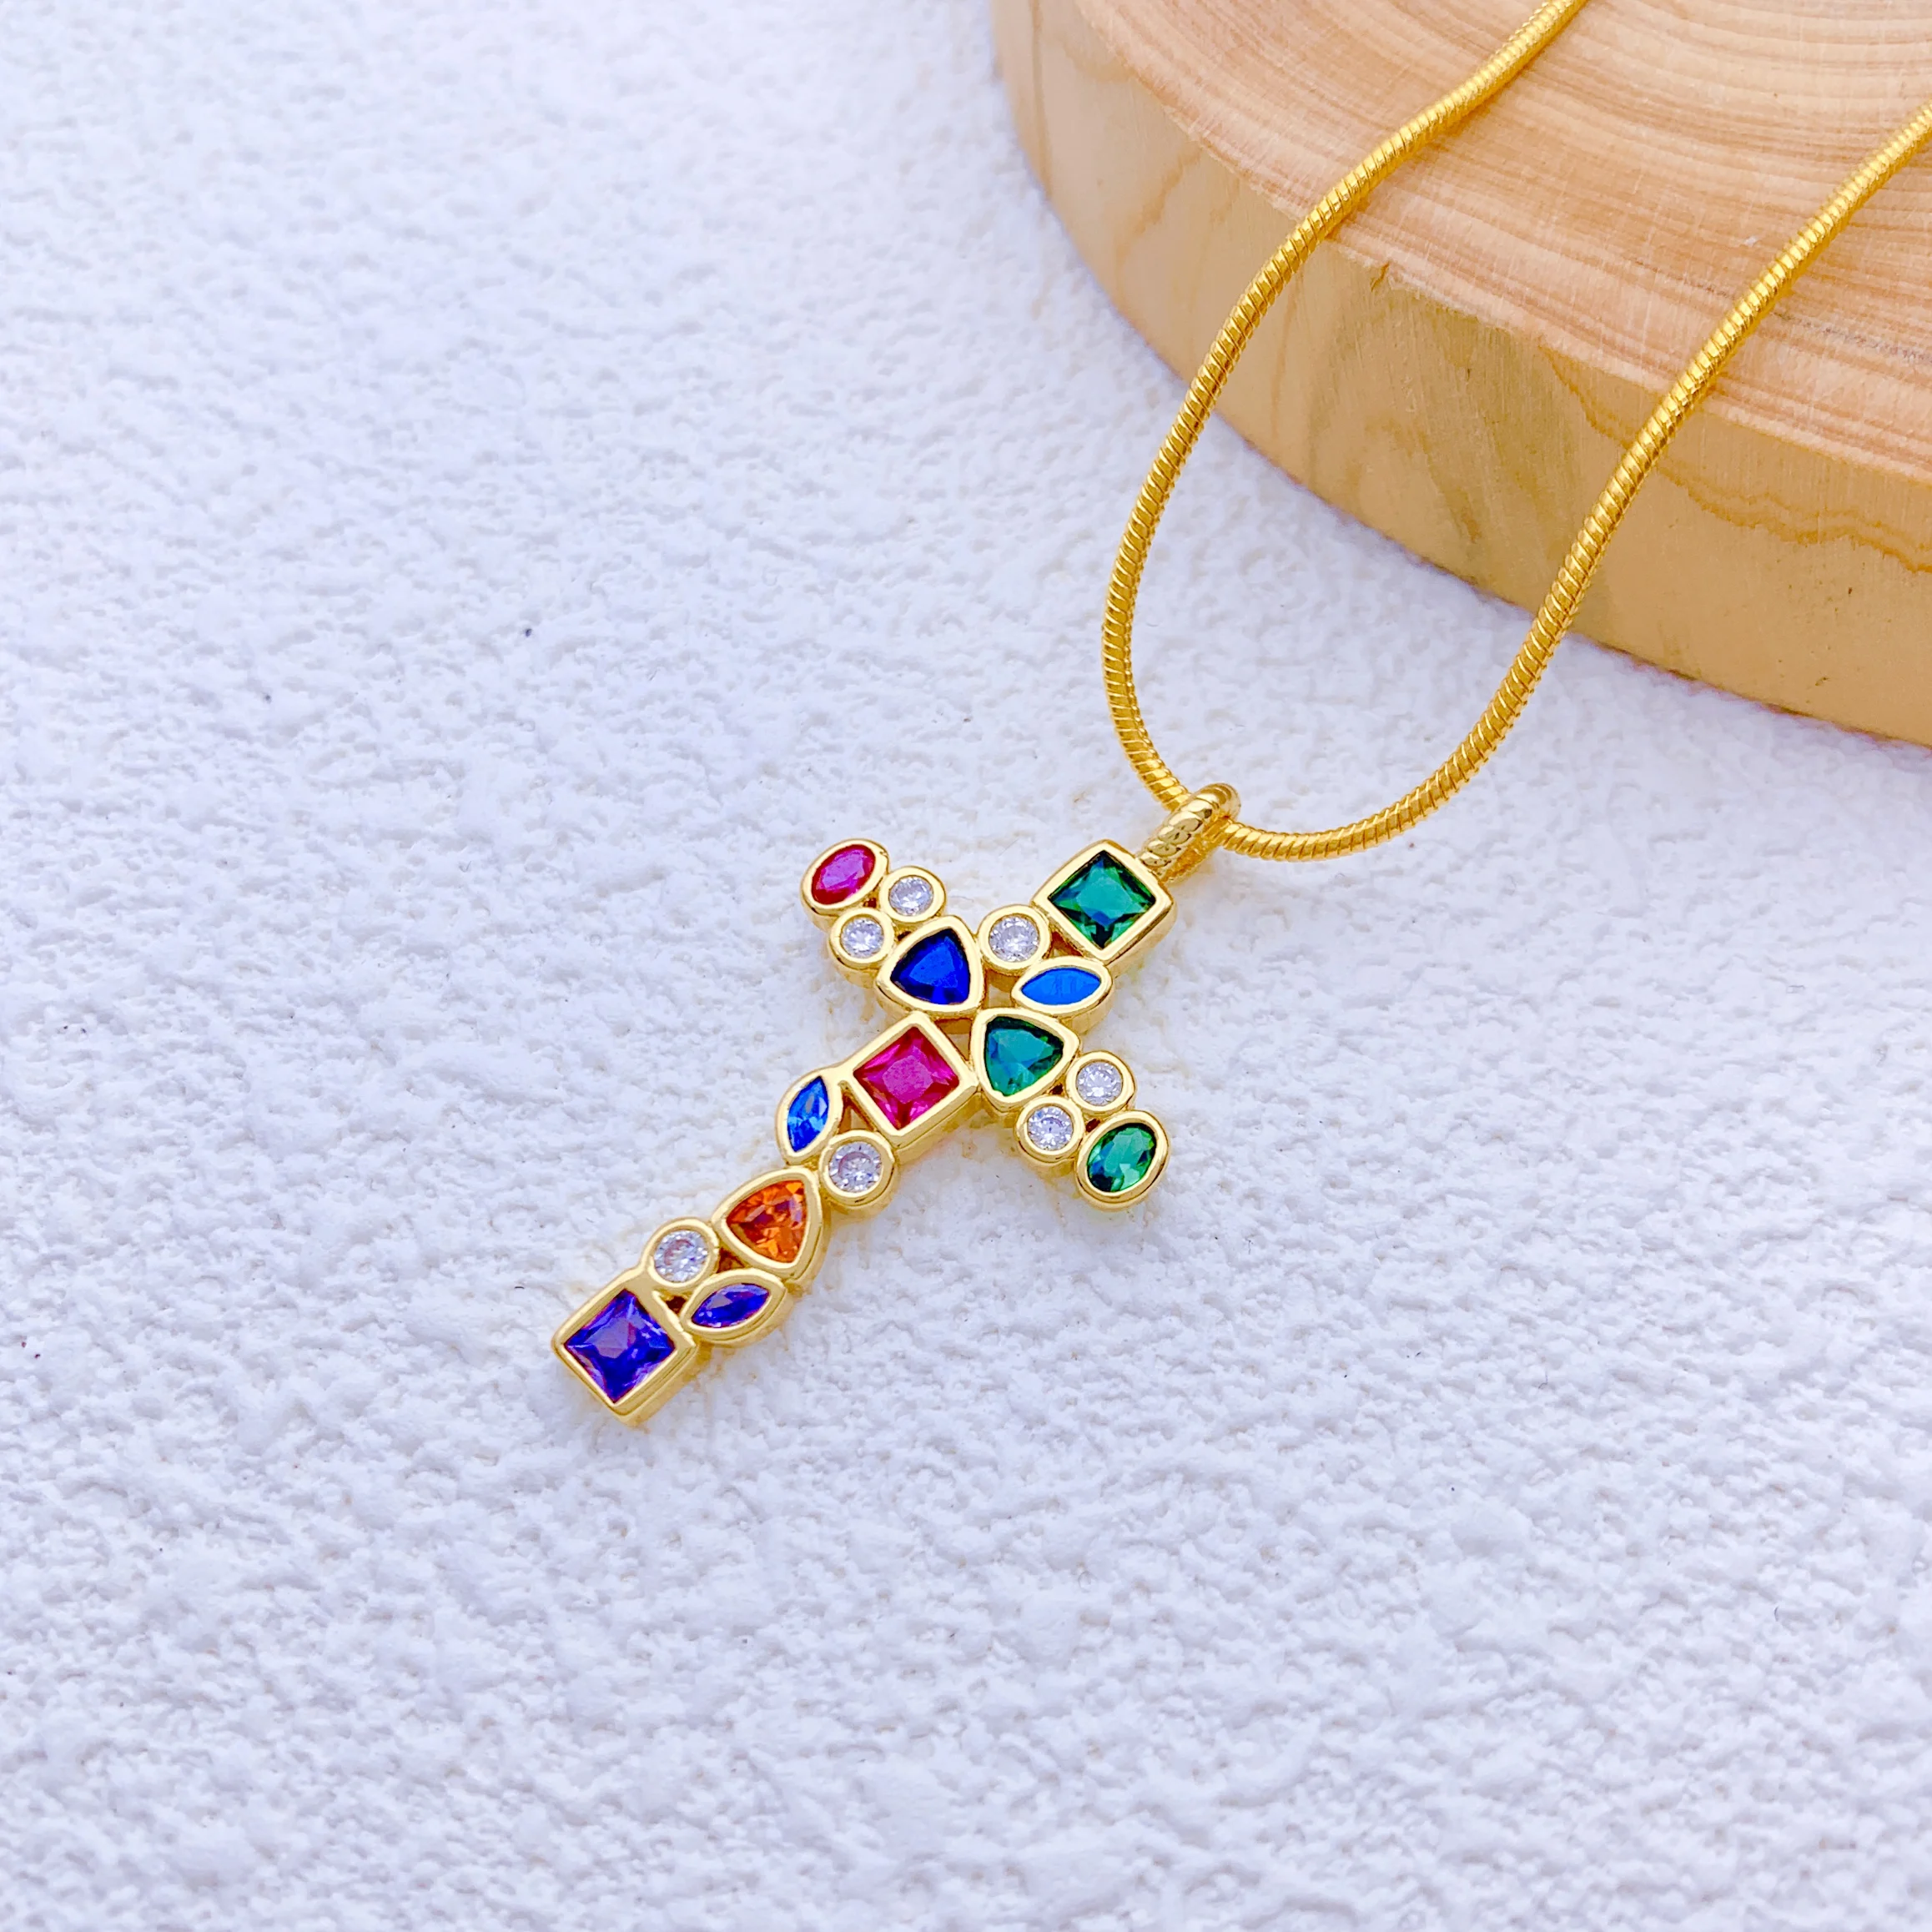 NEW Charm Rainbow Cross Crystal Pendant Chain Necklace Shiny Choker Necklaces Fashion Jewelry Mom Gifts For Women Drop Shipping